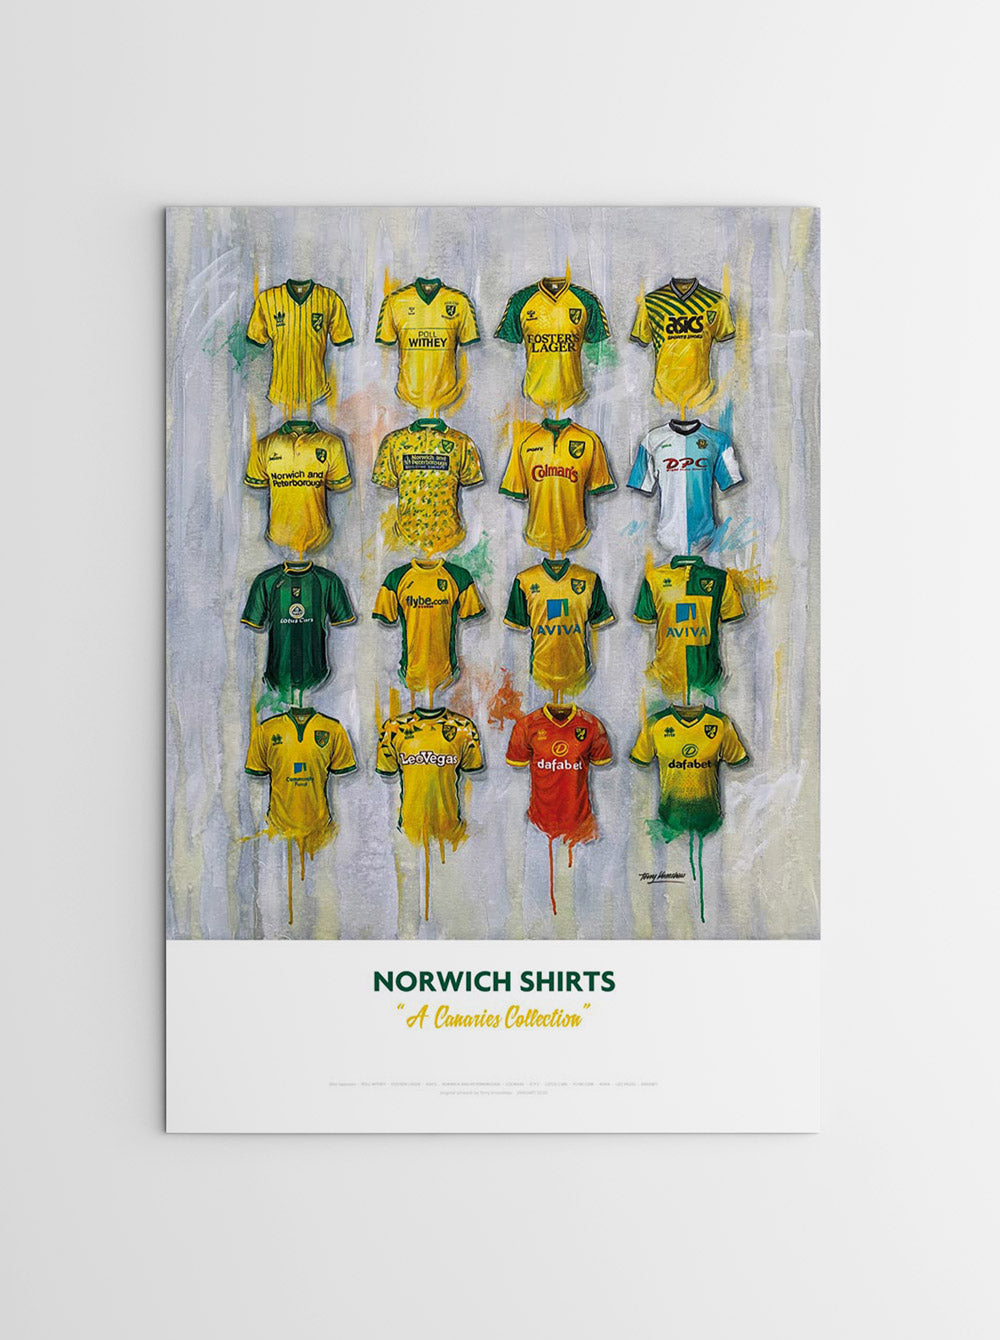 This is a limited edition print artwork by Terry Kneeshaw featuring 16 iconic Norwich team shirts. The Personalised A2 print showcases the evolution of the club's kits from 1970 to 2021, including the memorable 1992-1994 "bird poop" jersey. The artwork highlights the club's rich history and is a must-have for any Norwich fan. The A2 size makes it a great addition to any room or office space.